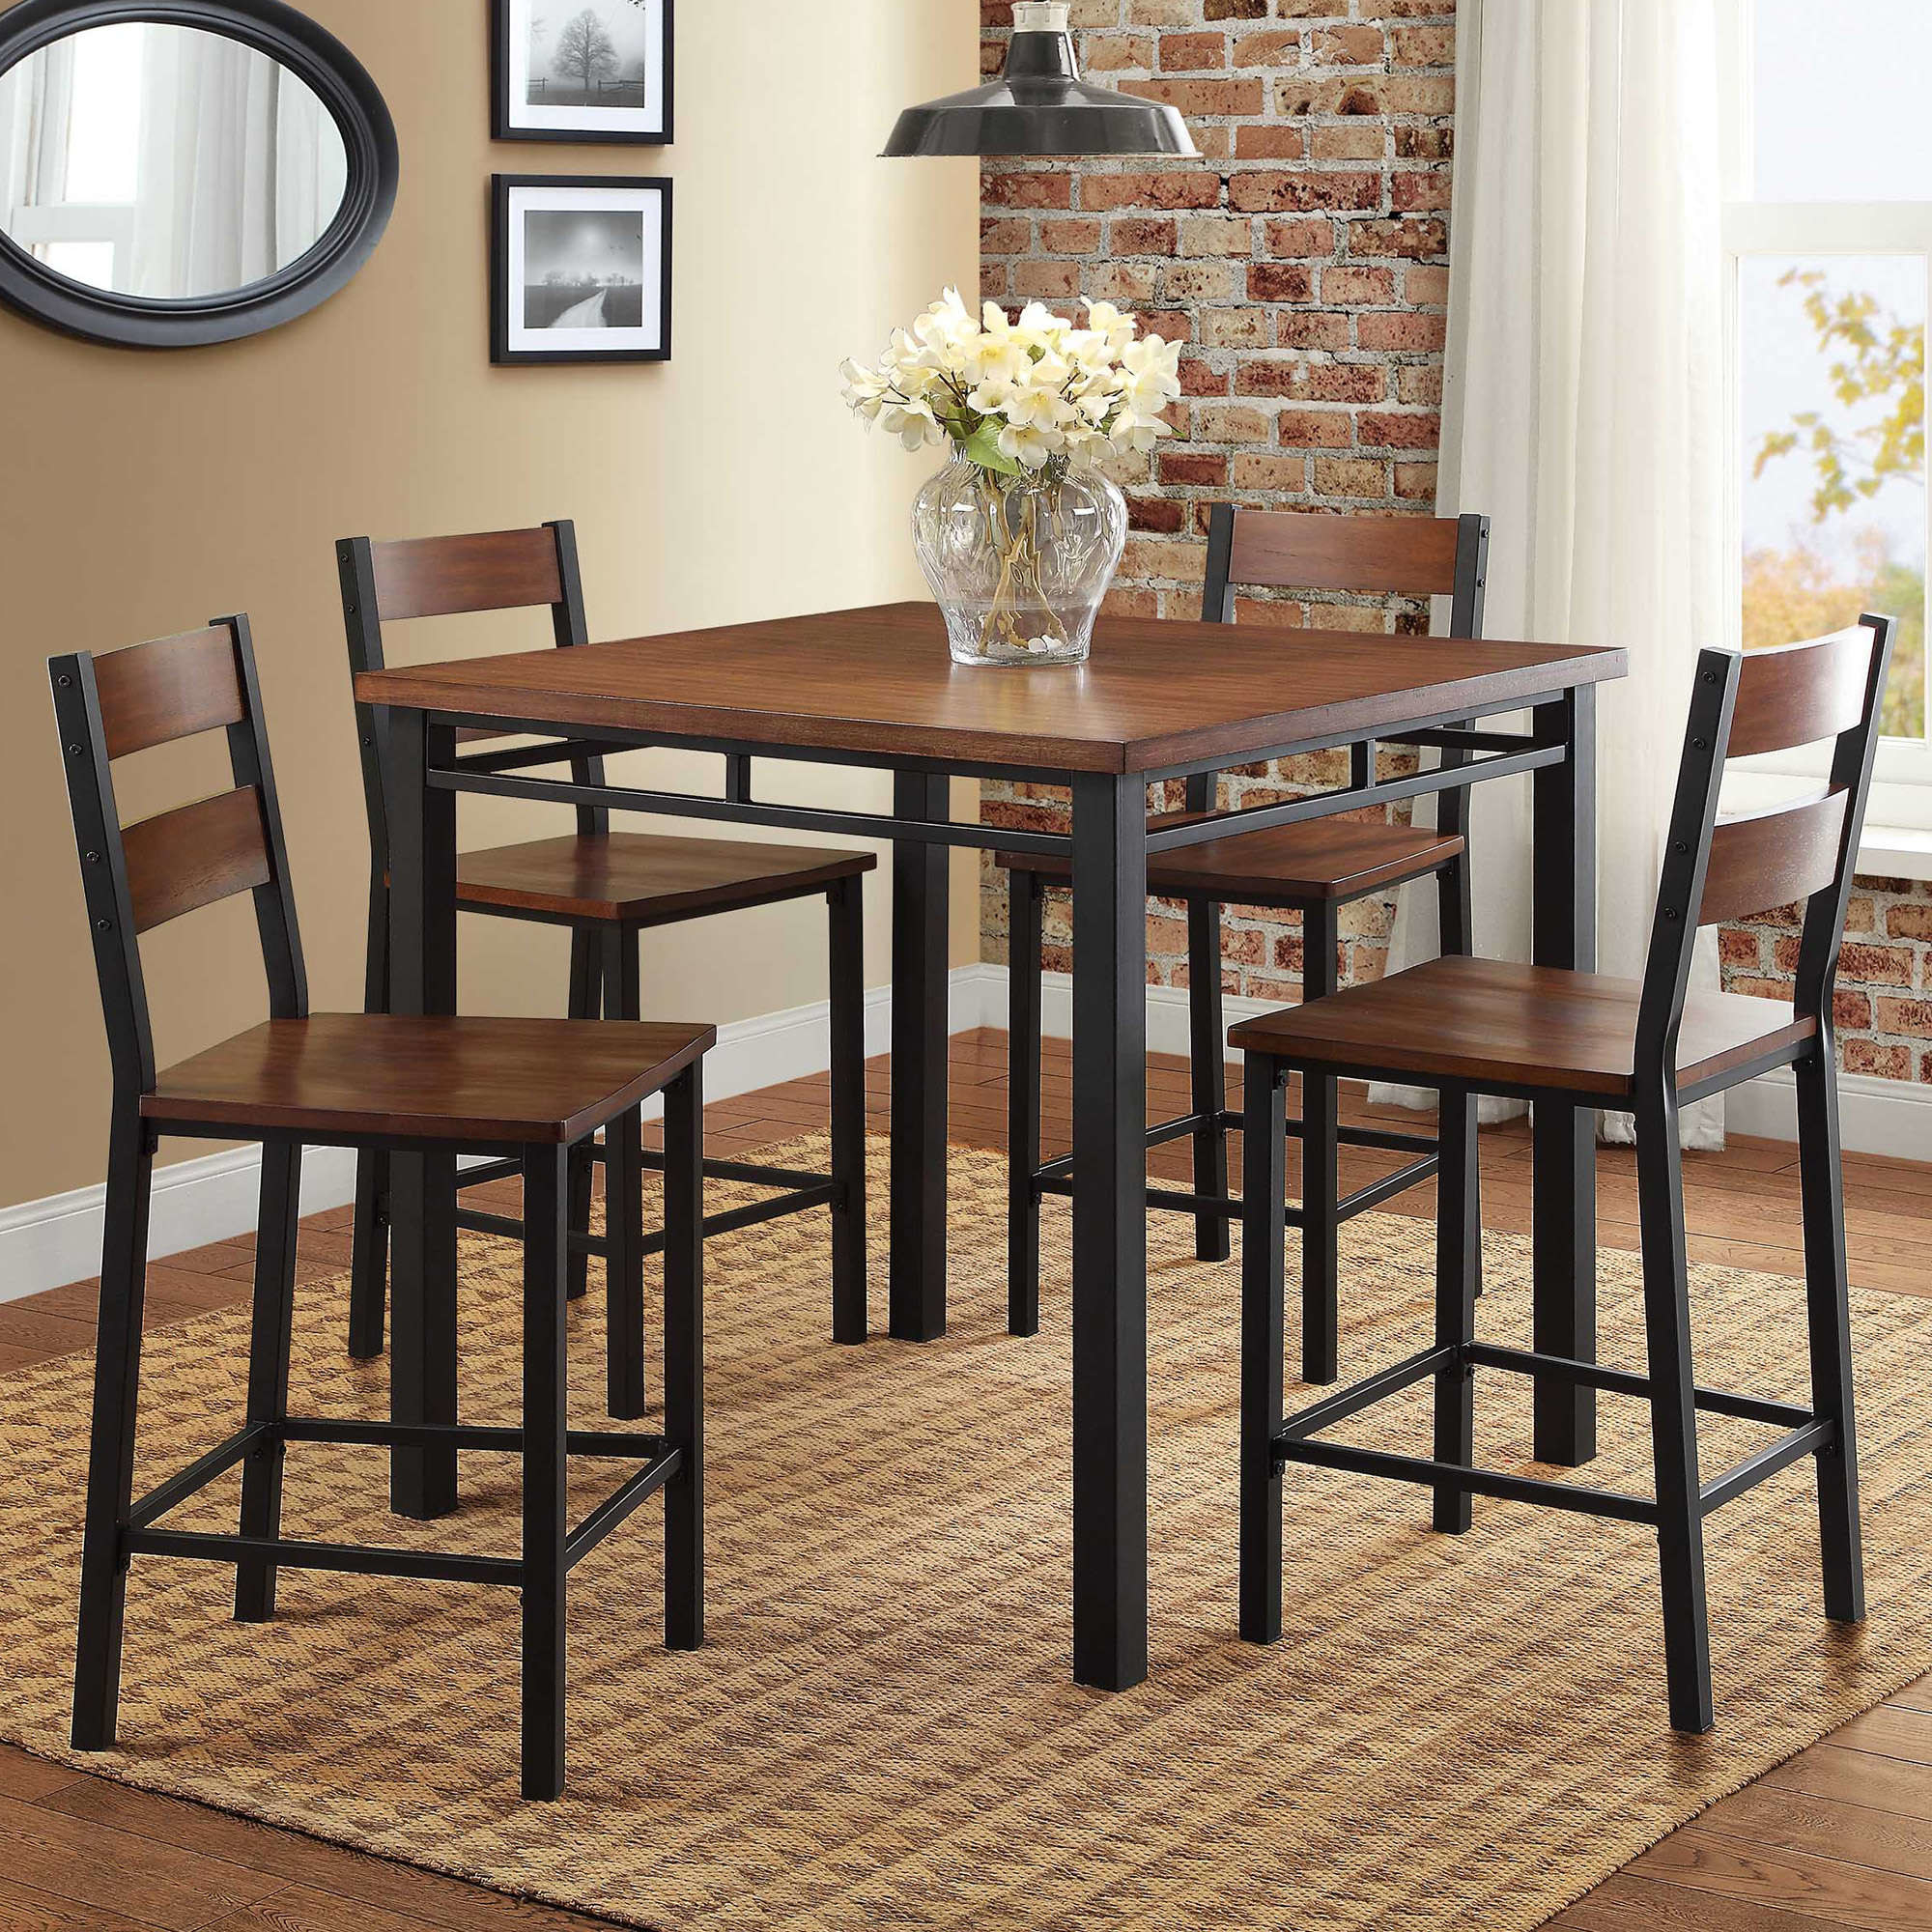 An image of a five-piece dining set with four chairs and one table